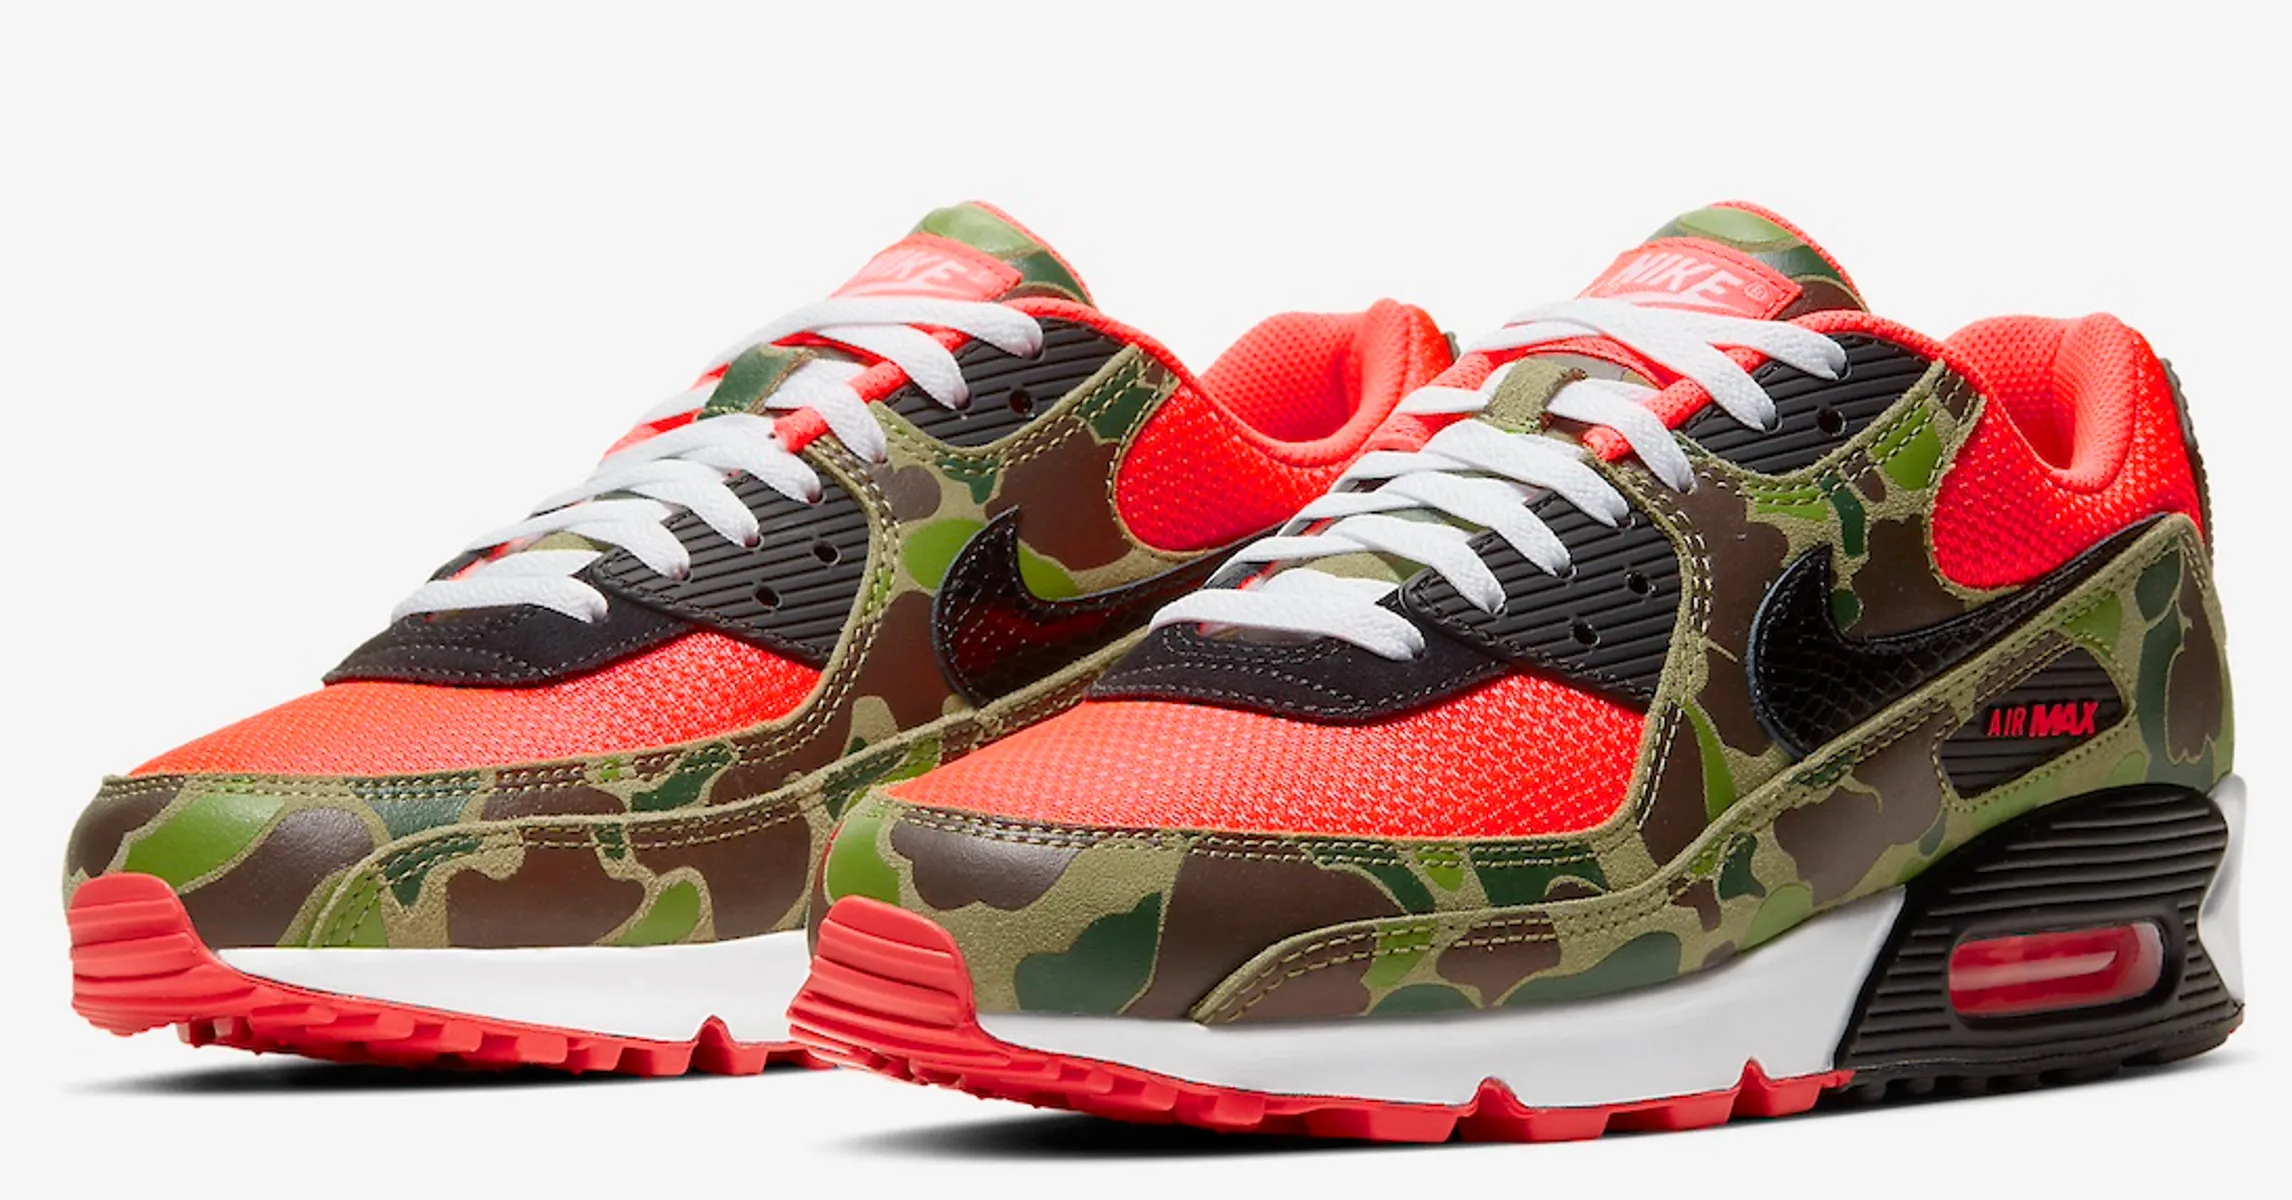 Nike Air Max 90 “Reverse Duck Camo” Officially Restocking In Fall